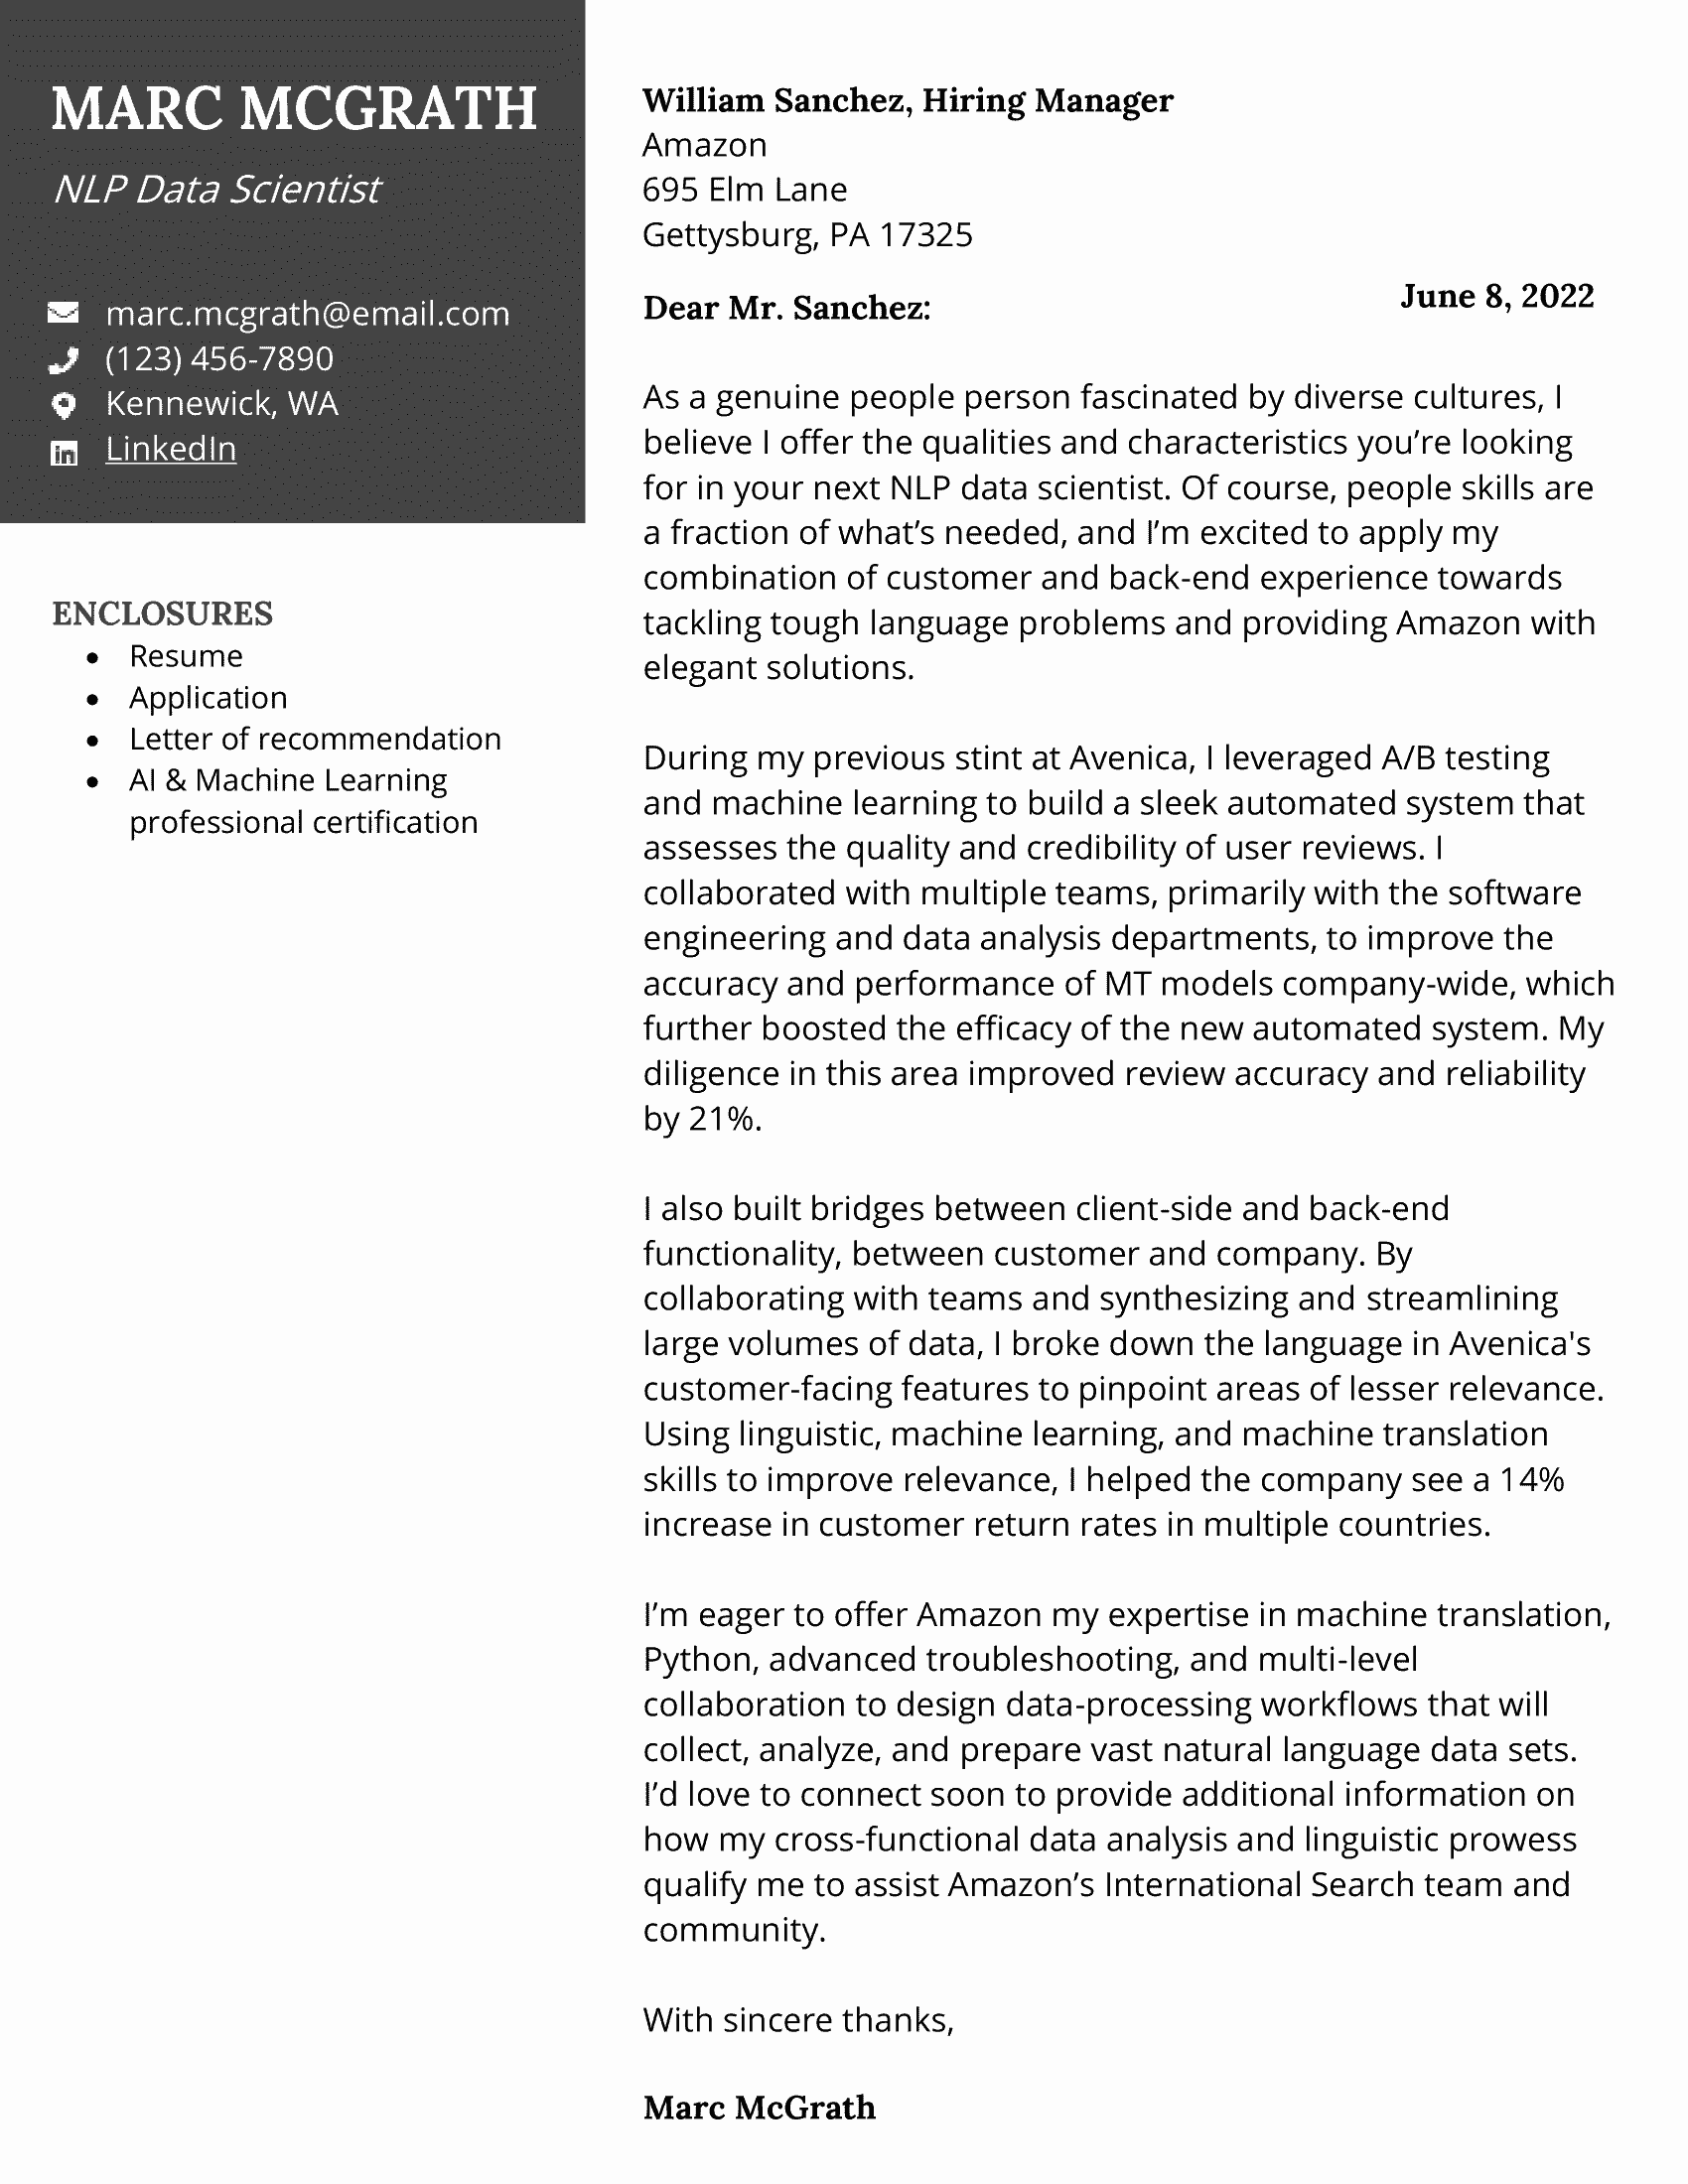 NLP data scientist cover letter with black contact header